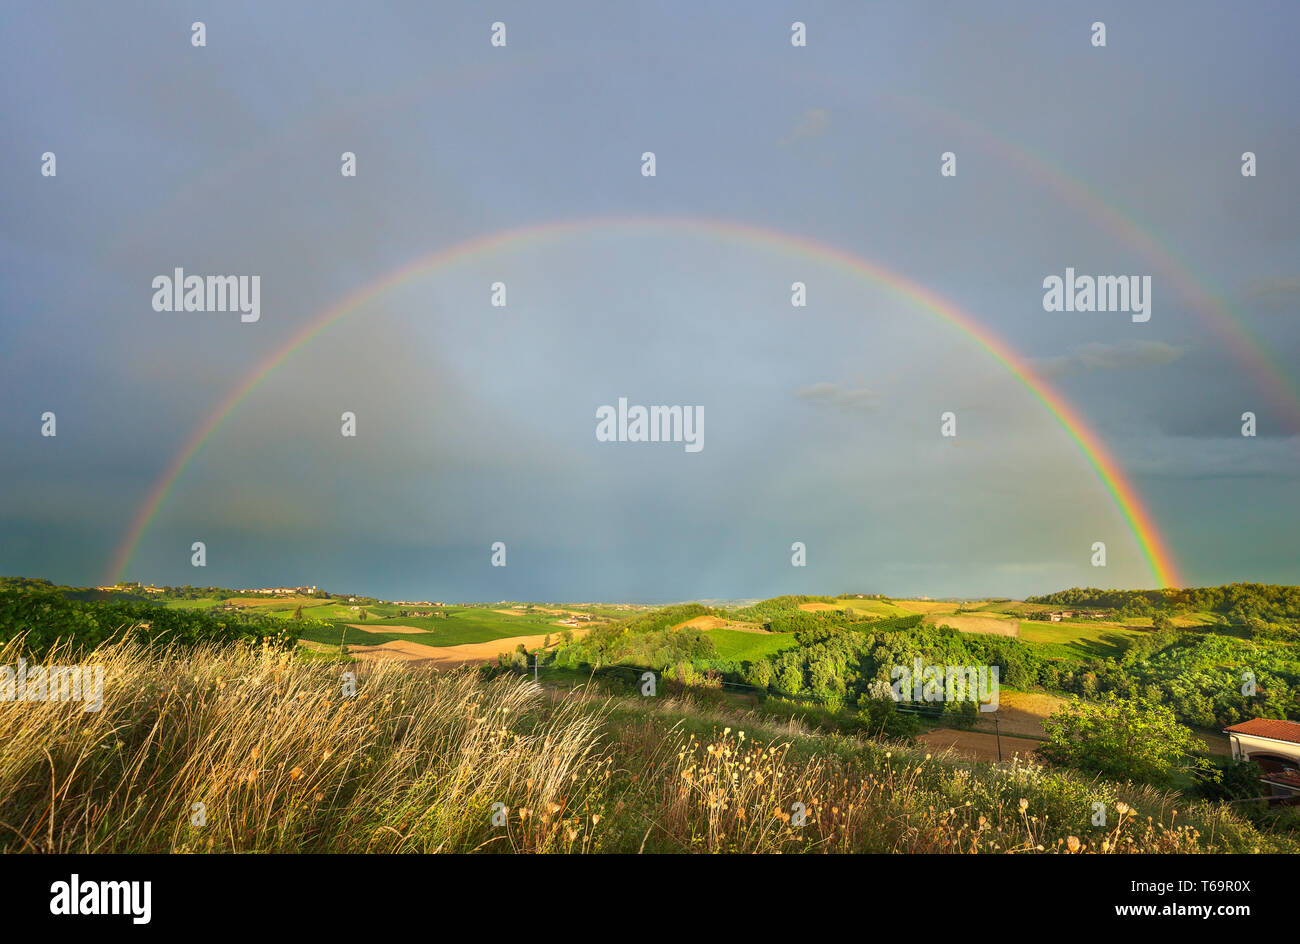 The Piedmont landscape with a rainbow after the rain Stock Photo